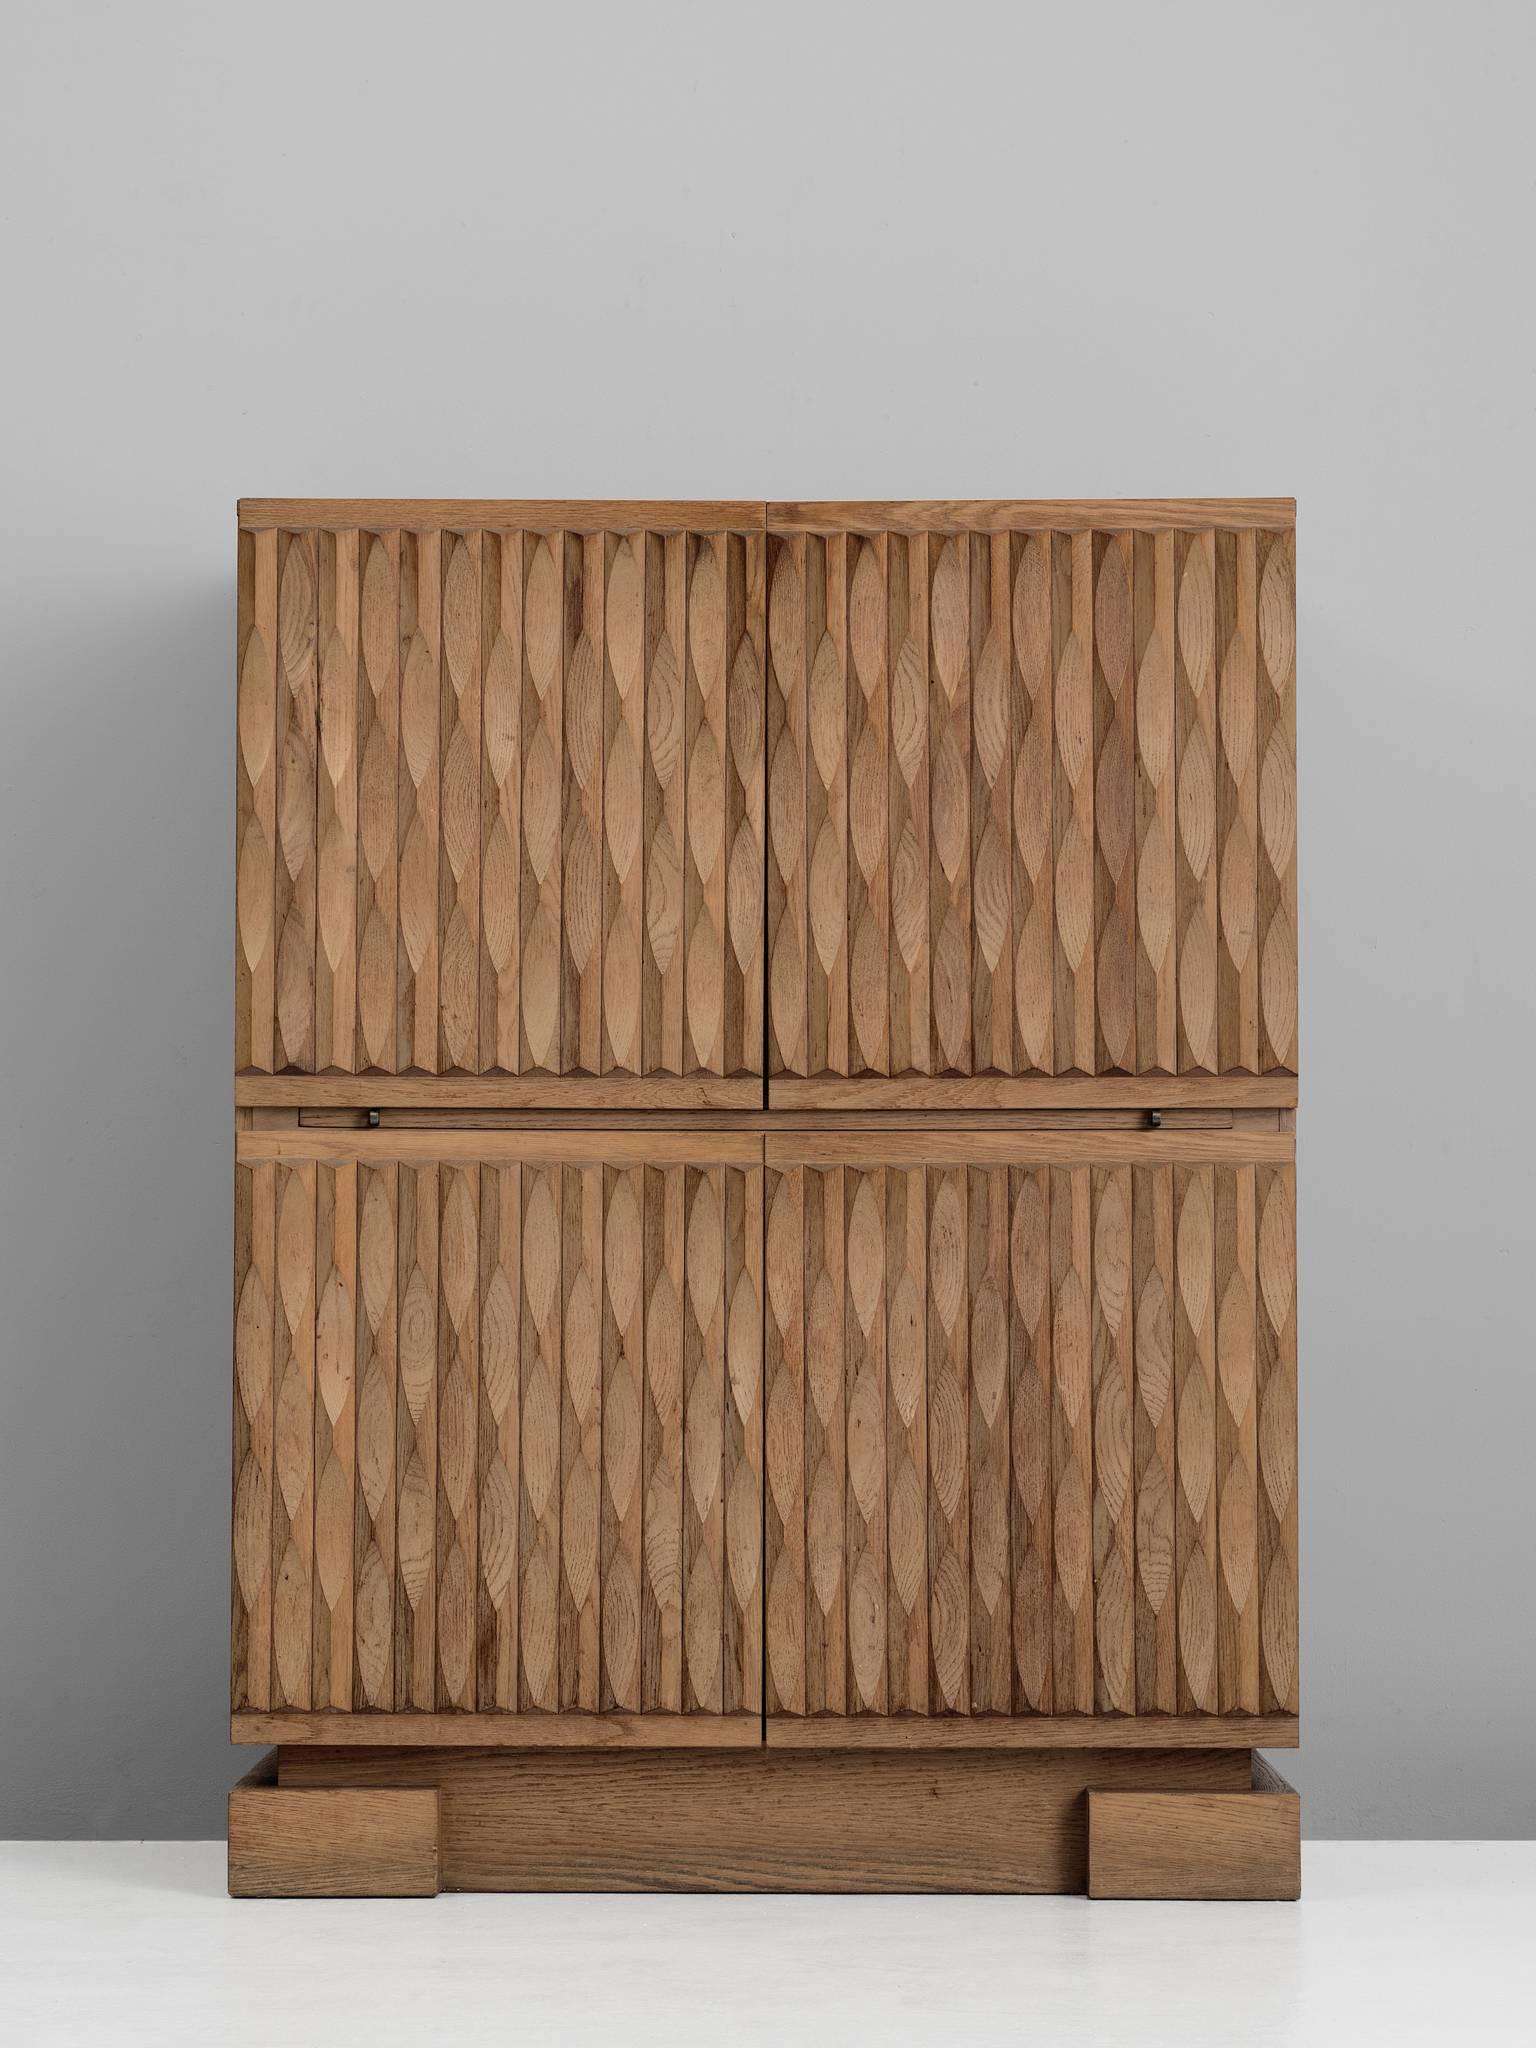 Sideboard, in oak, Europe, 1970s.

Sturdy high-board in oak with graphical designed door panels. Four door panels, each with a exceptional three-dimensional pattern. The continuous pattern gives this bar-cabinet a very strong expression,